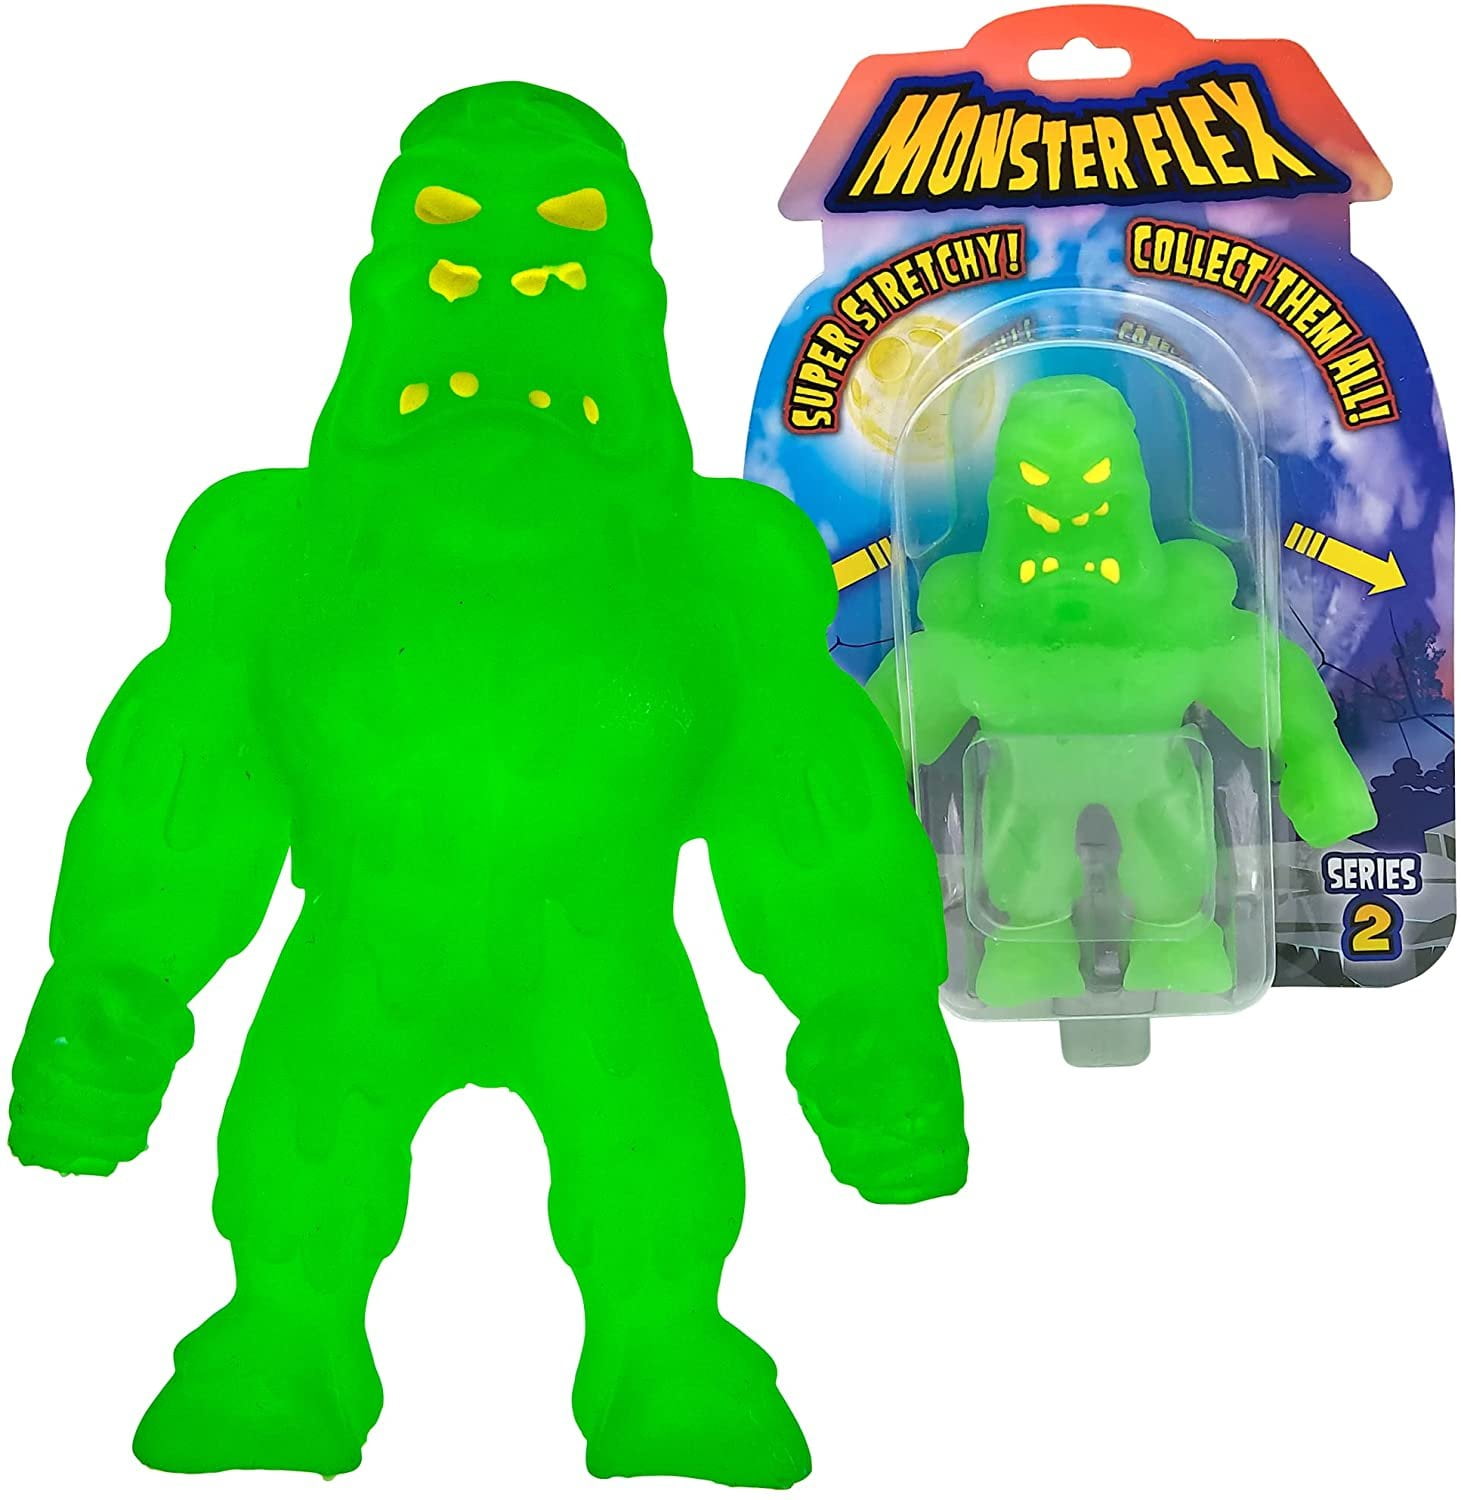 Handee Products - Super Stretchy Monster – Green Beans Toys